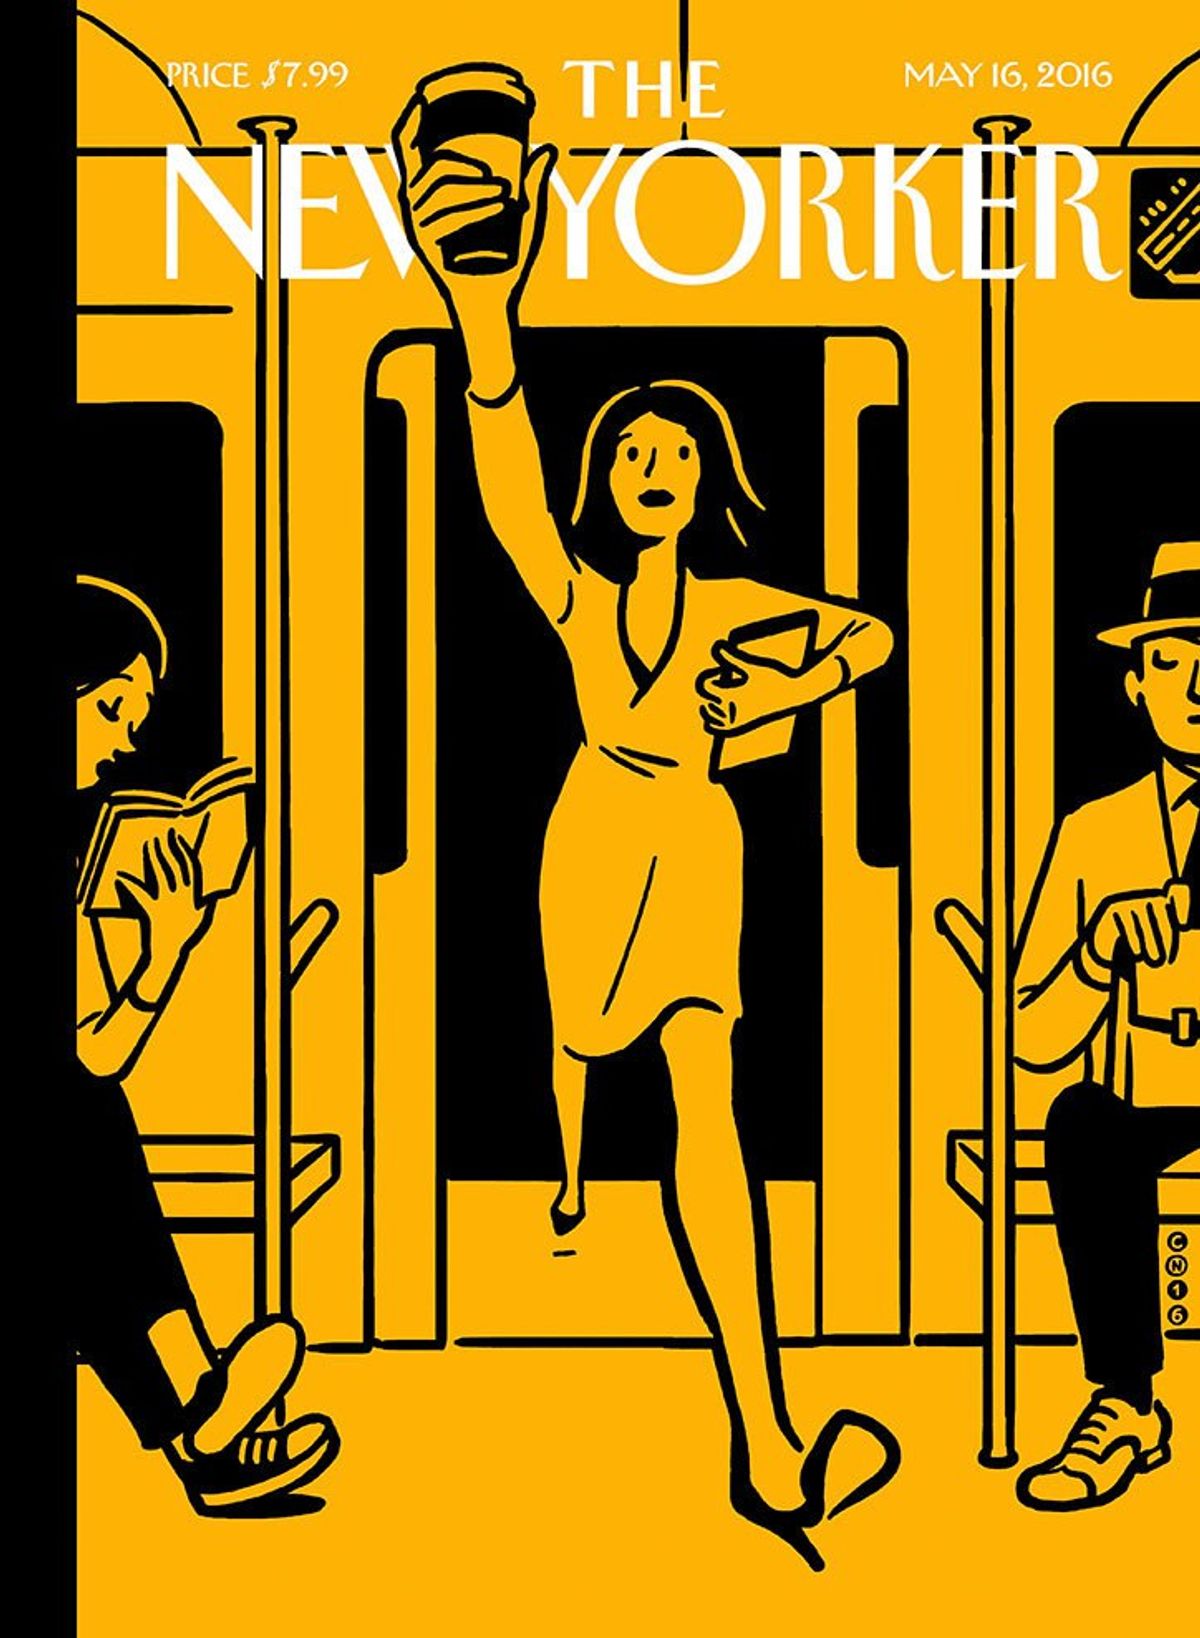 How To Be A New Yorker The Right Way